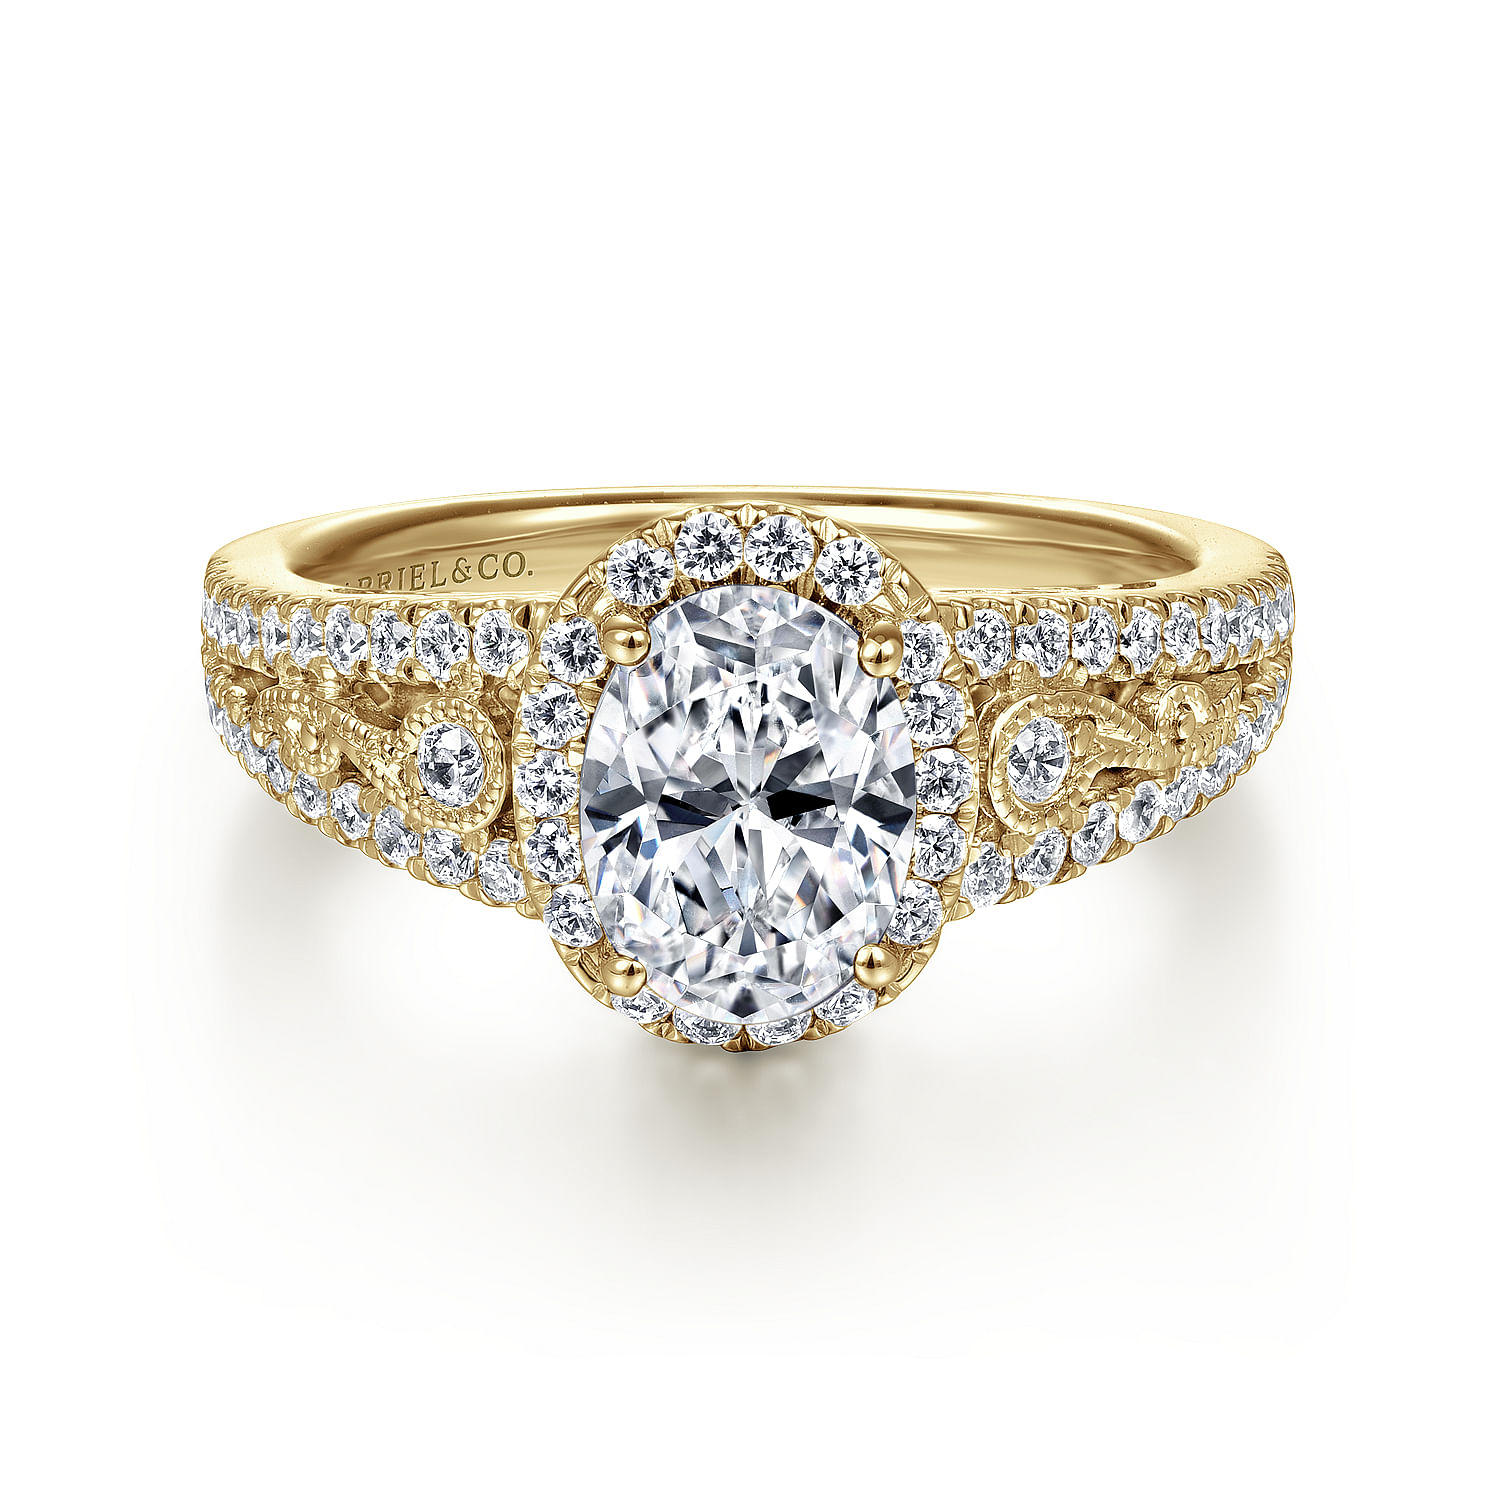 Gabriel - Vintage Inspired 14K Yellow Gold Oval Halo Diamond Engagement Ring